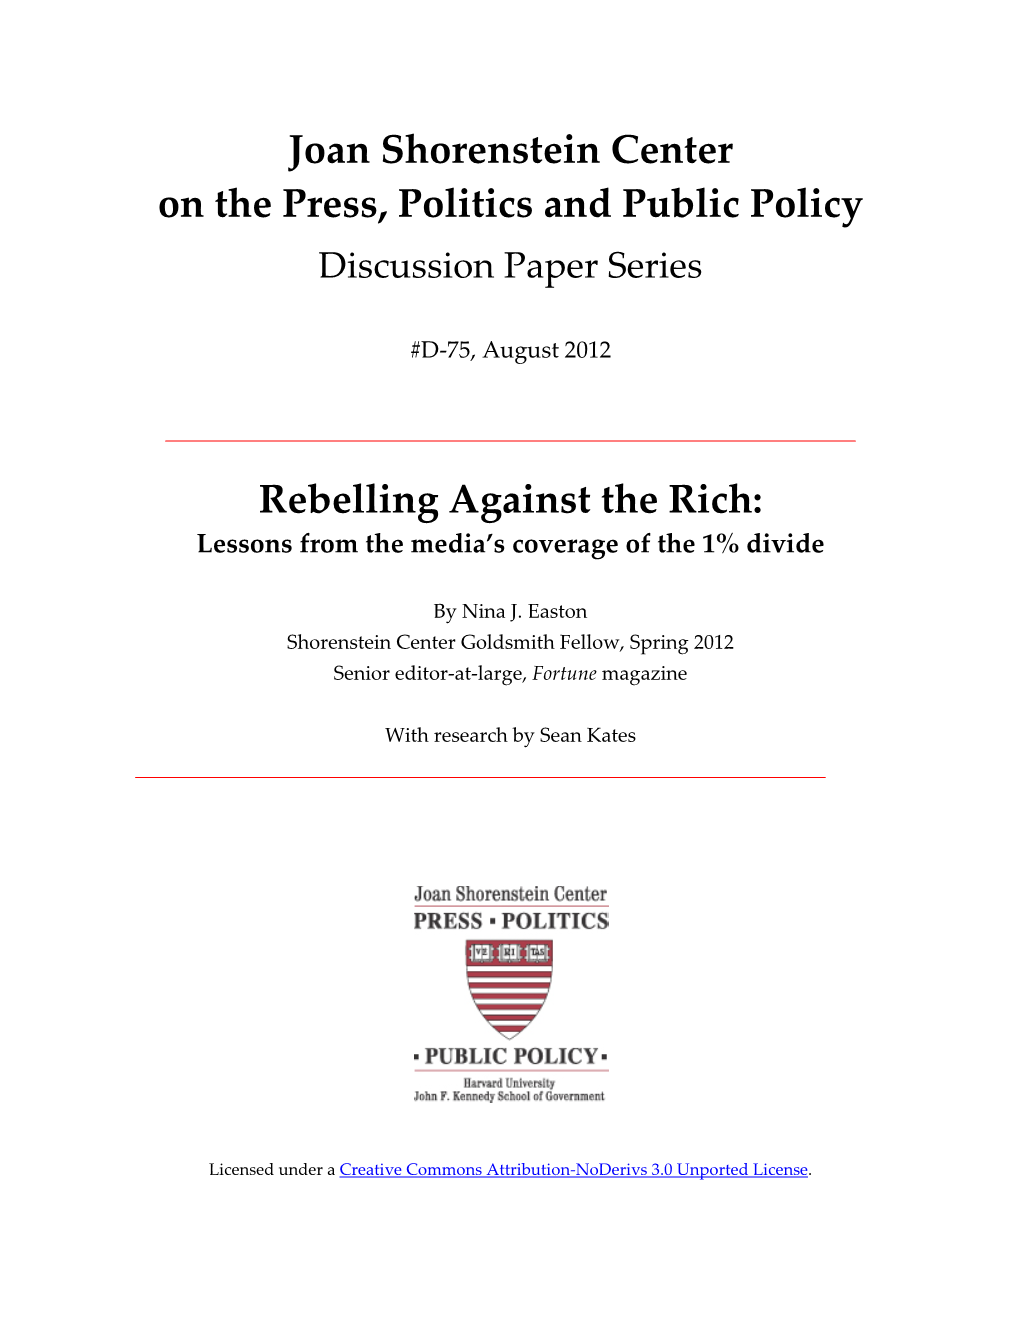 Joan Shorenstein Center on the Press, Politics and Public Policy Rebelling Against the Rich